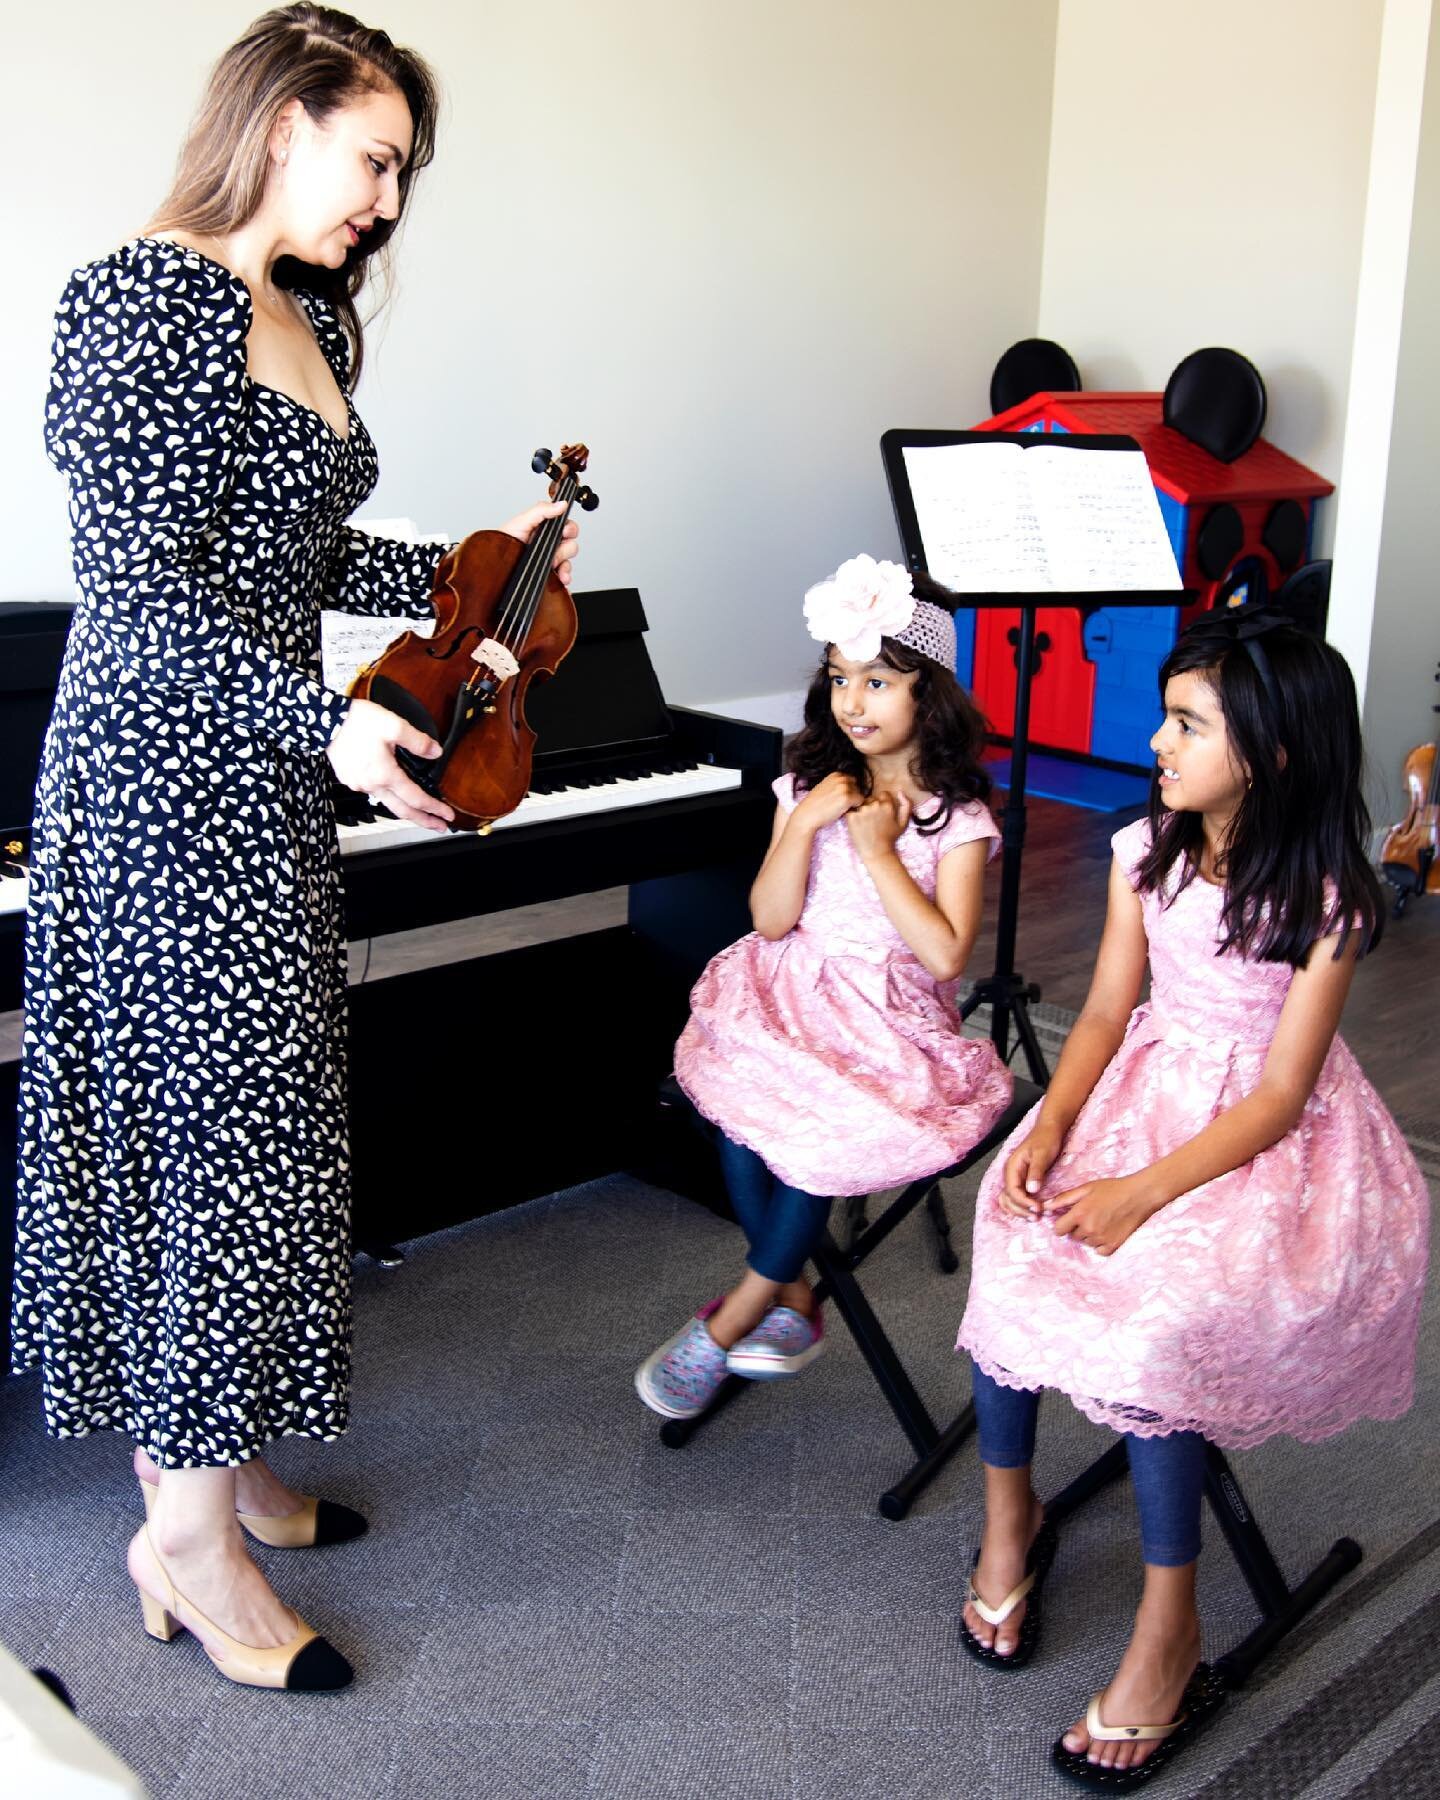 We have created a unique system where each lesson will work on a variety of skills, such as listening, observing and communicating. 

Vancouver Island Conservatory of Music &amp; Arts offers one-on-one private classes and group lessons for more infor